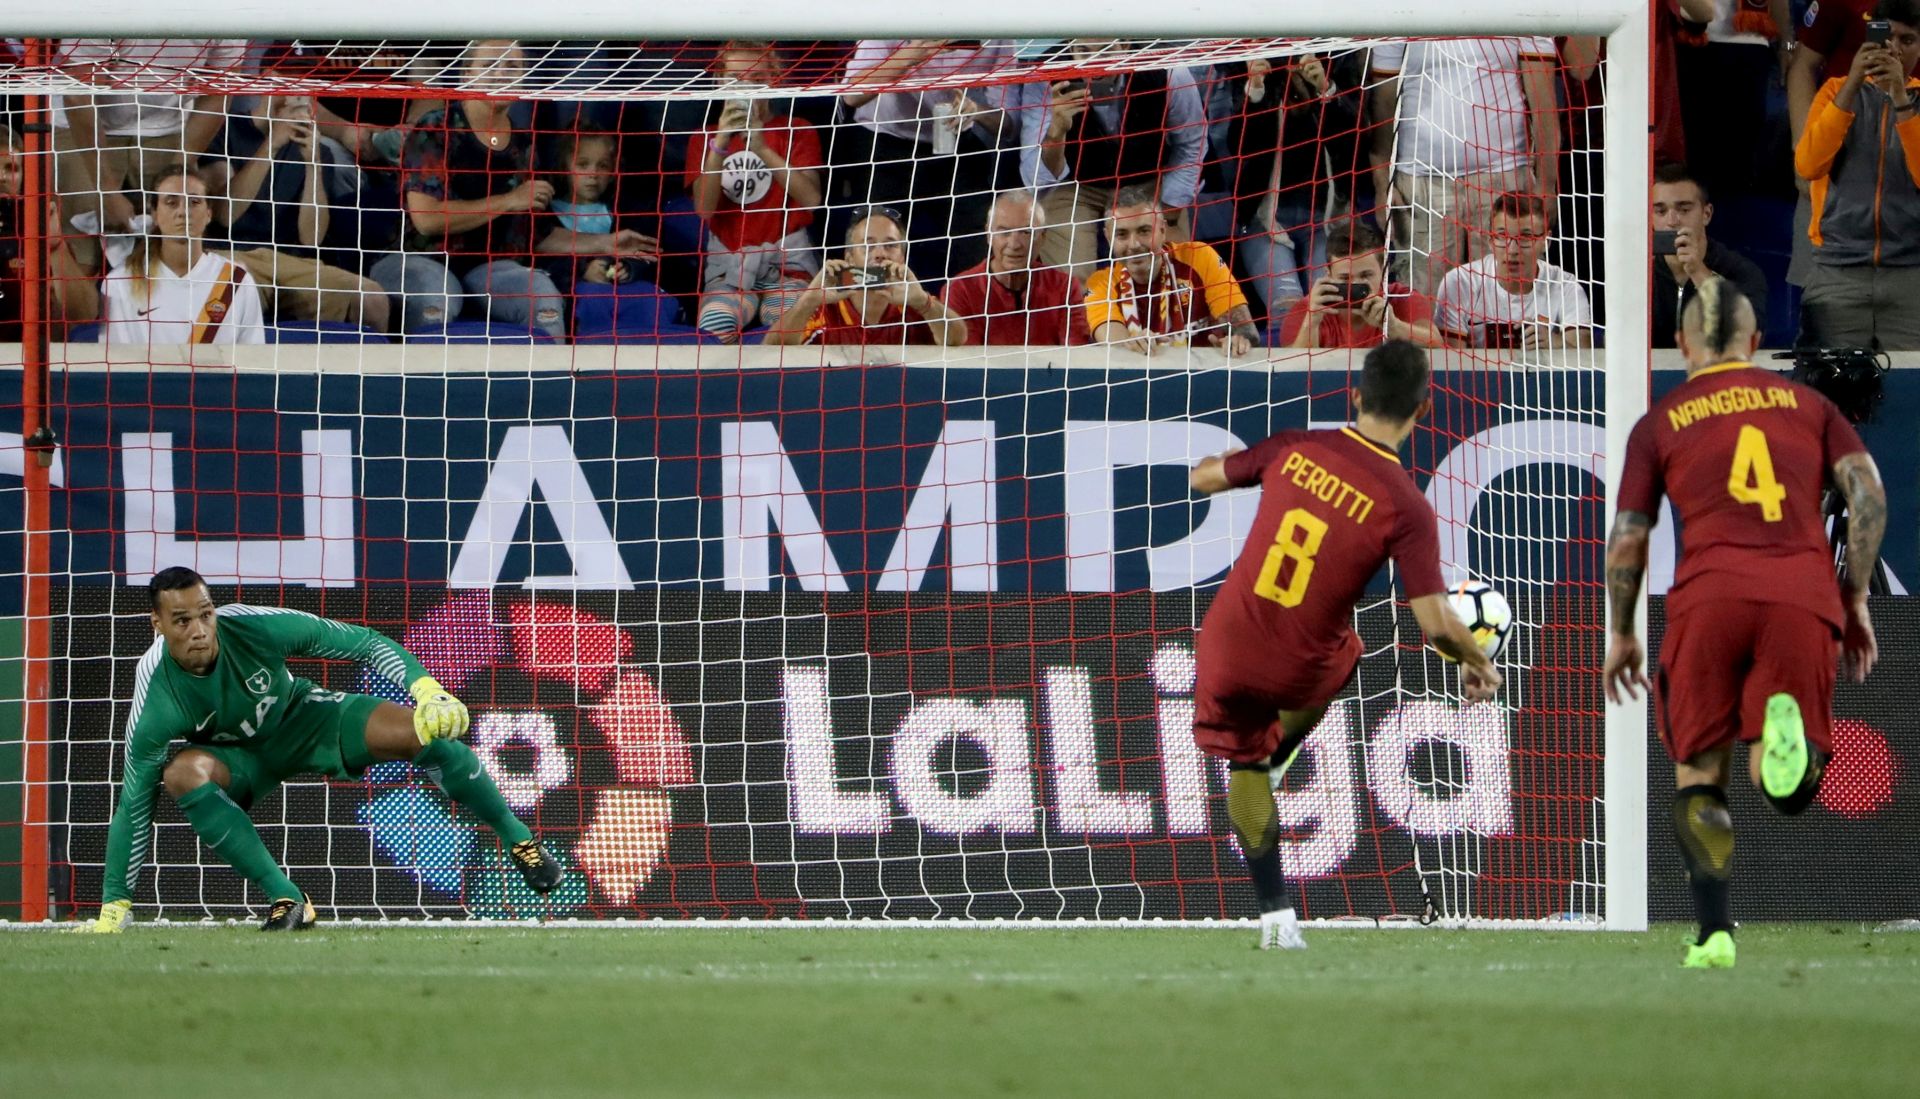 epa06109750 Diego Perotti (C) of AS Roma scores a penalty shot past goalkeeper Michael Vorm (L) of Tottenham Hotspur during their match of the International Champions Cup at Red Bull Arena in Harrison, New Jersey USA, 25 July 2017.  EPA/ANDREW GOMBERT